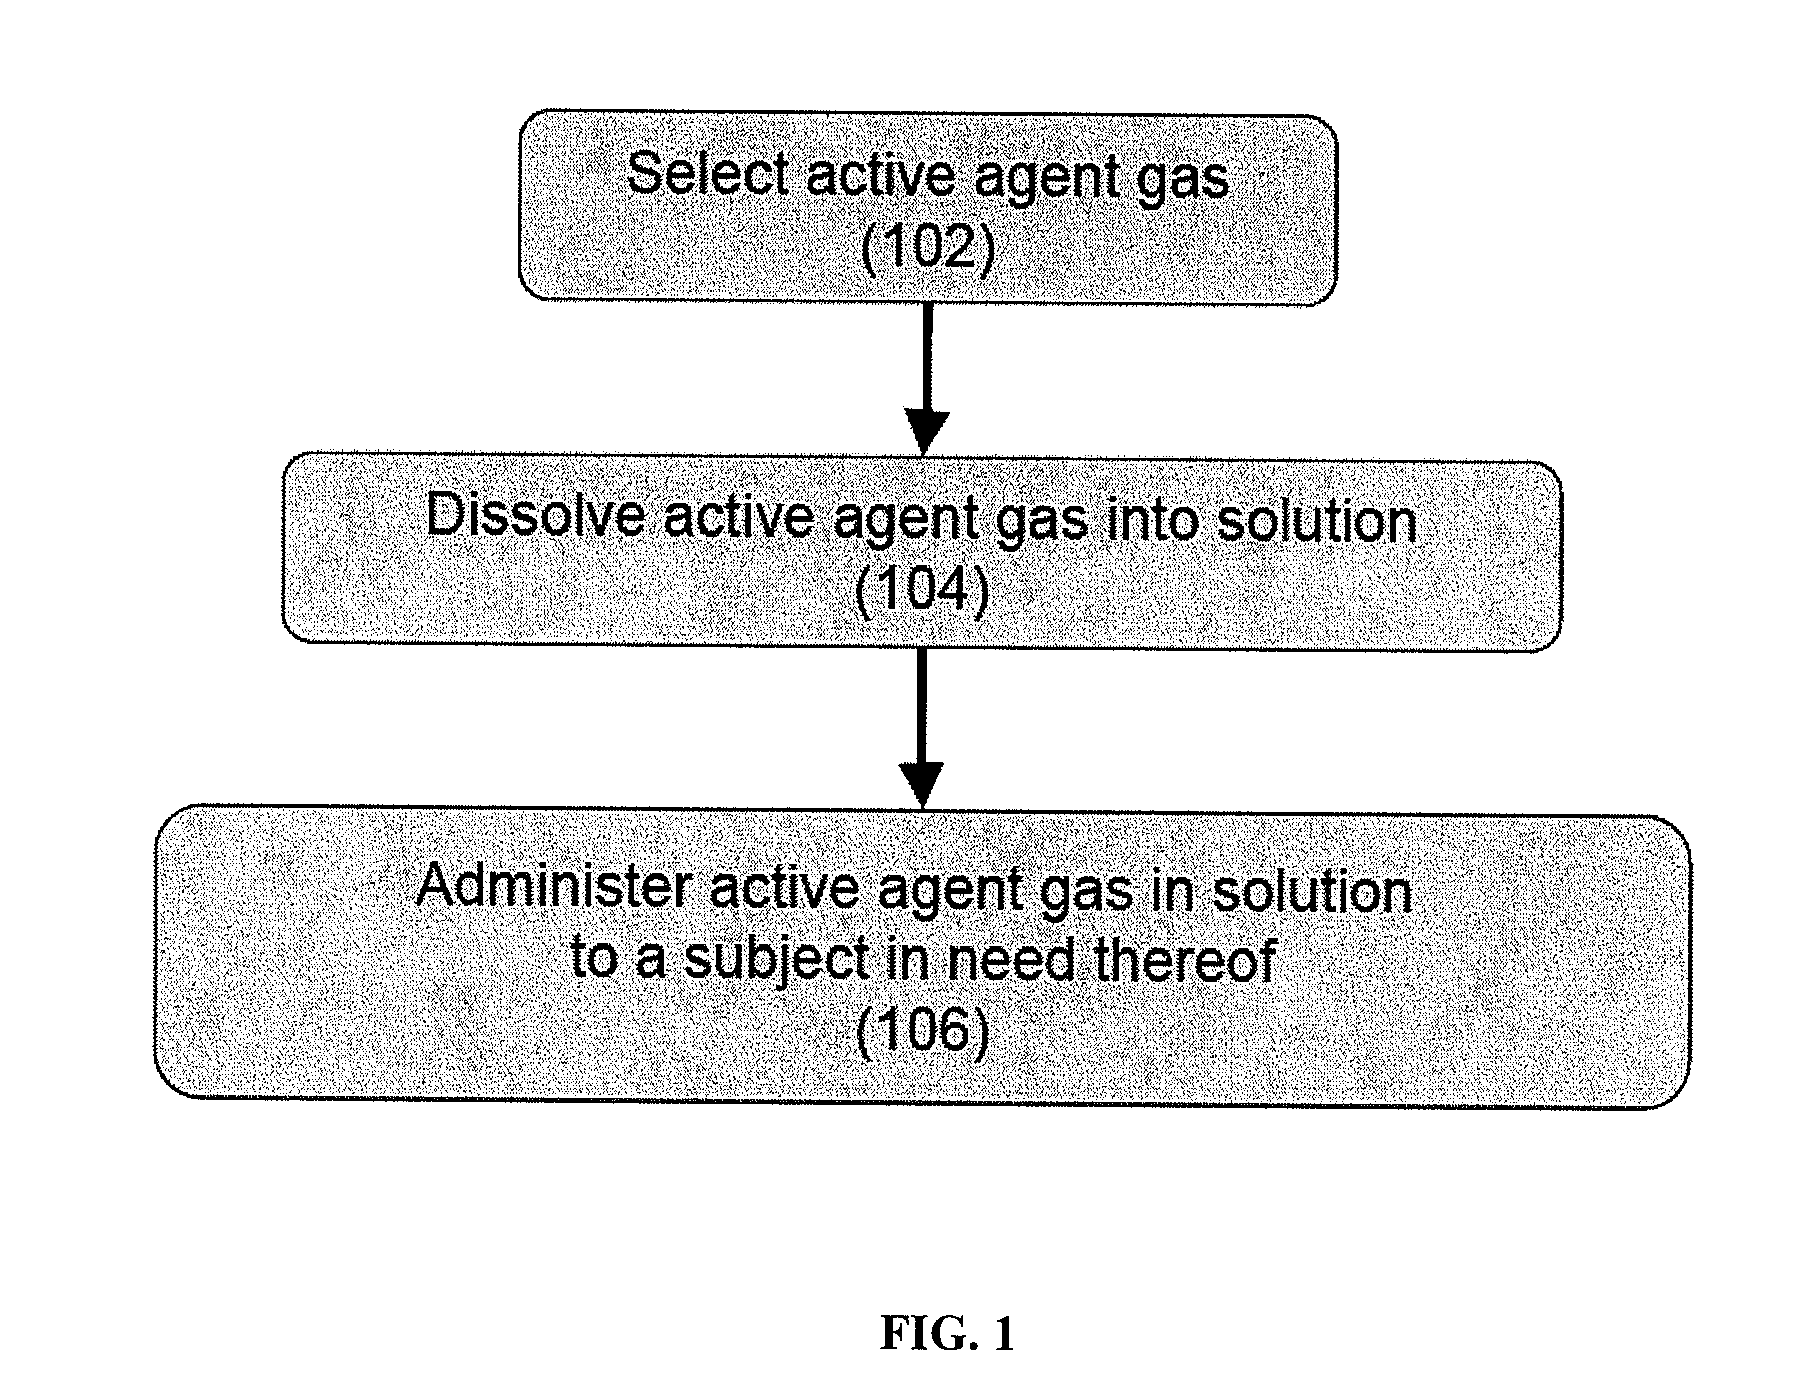 Methods for Delivering Volatile Anesthetics for Regional Anesthesia and/or Pain Relief